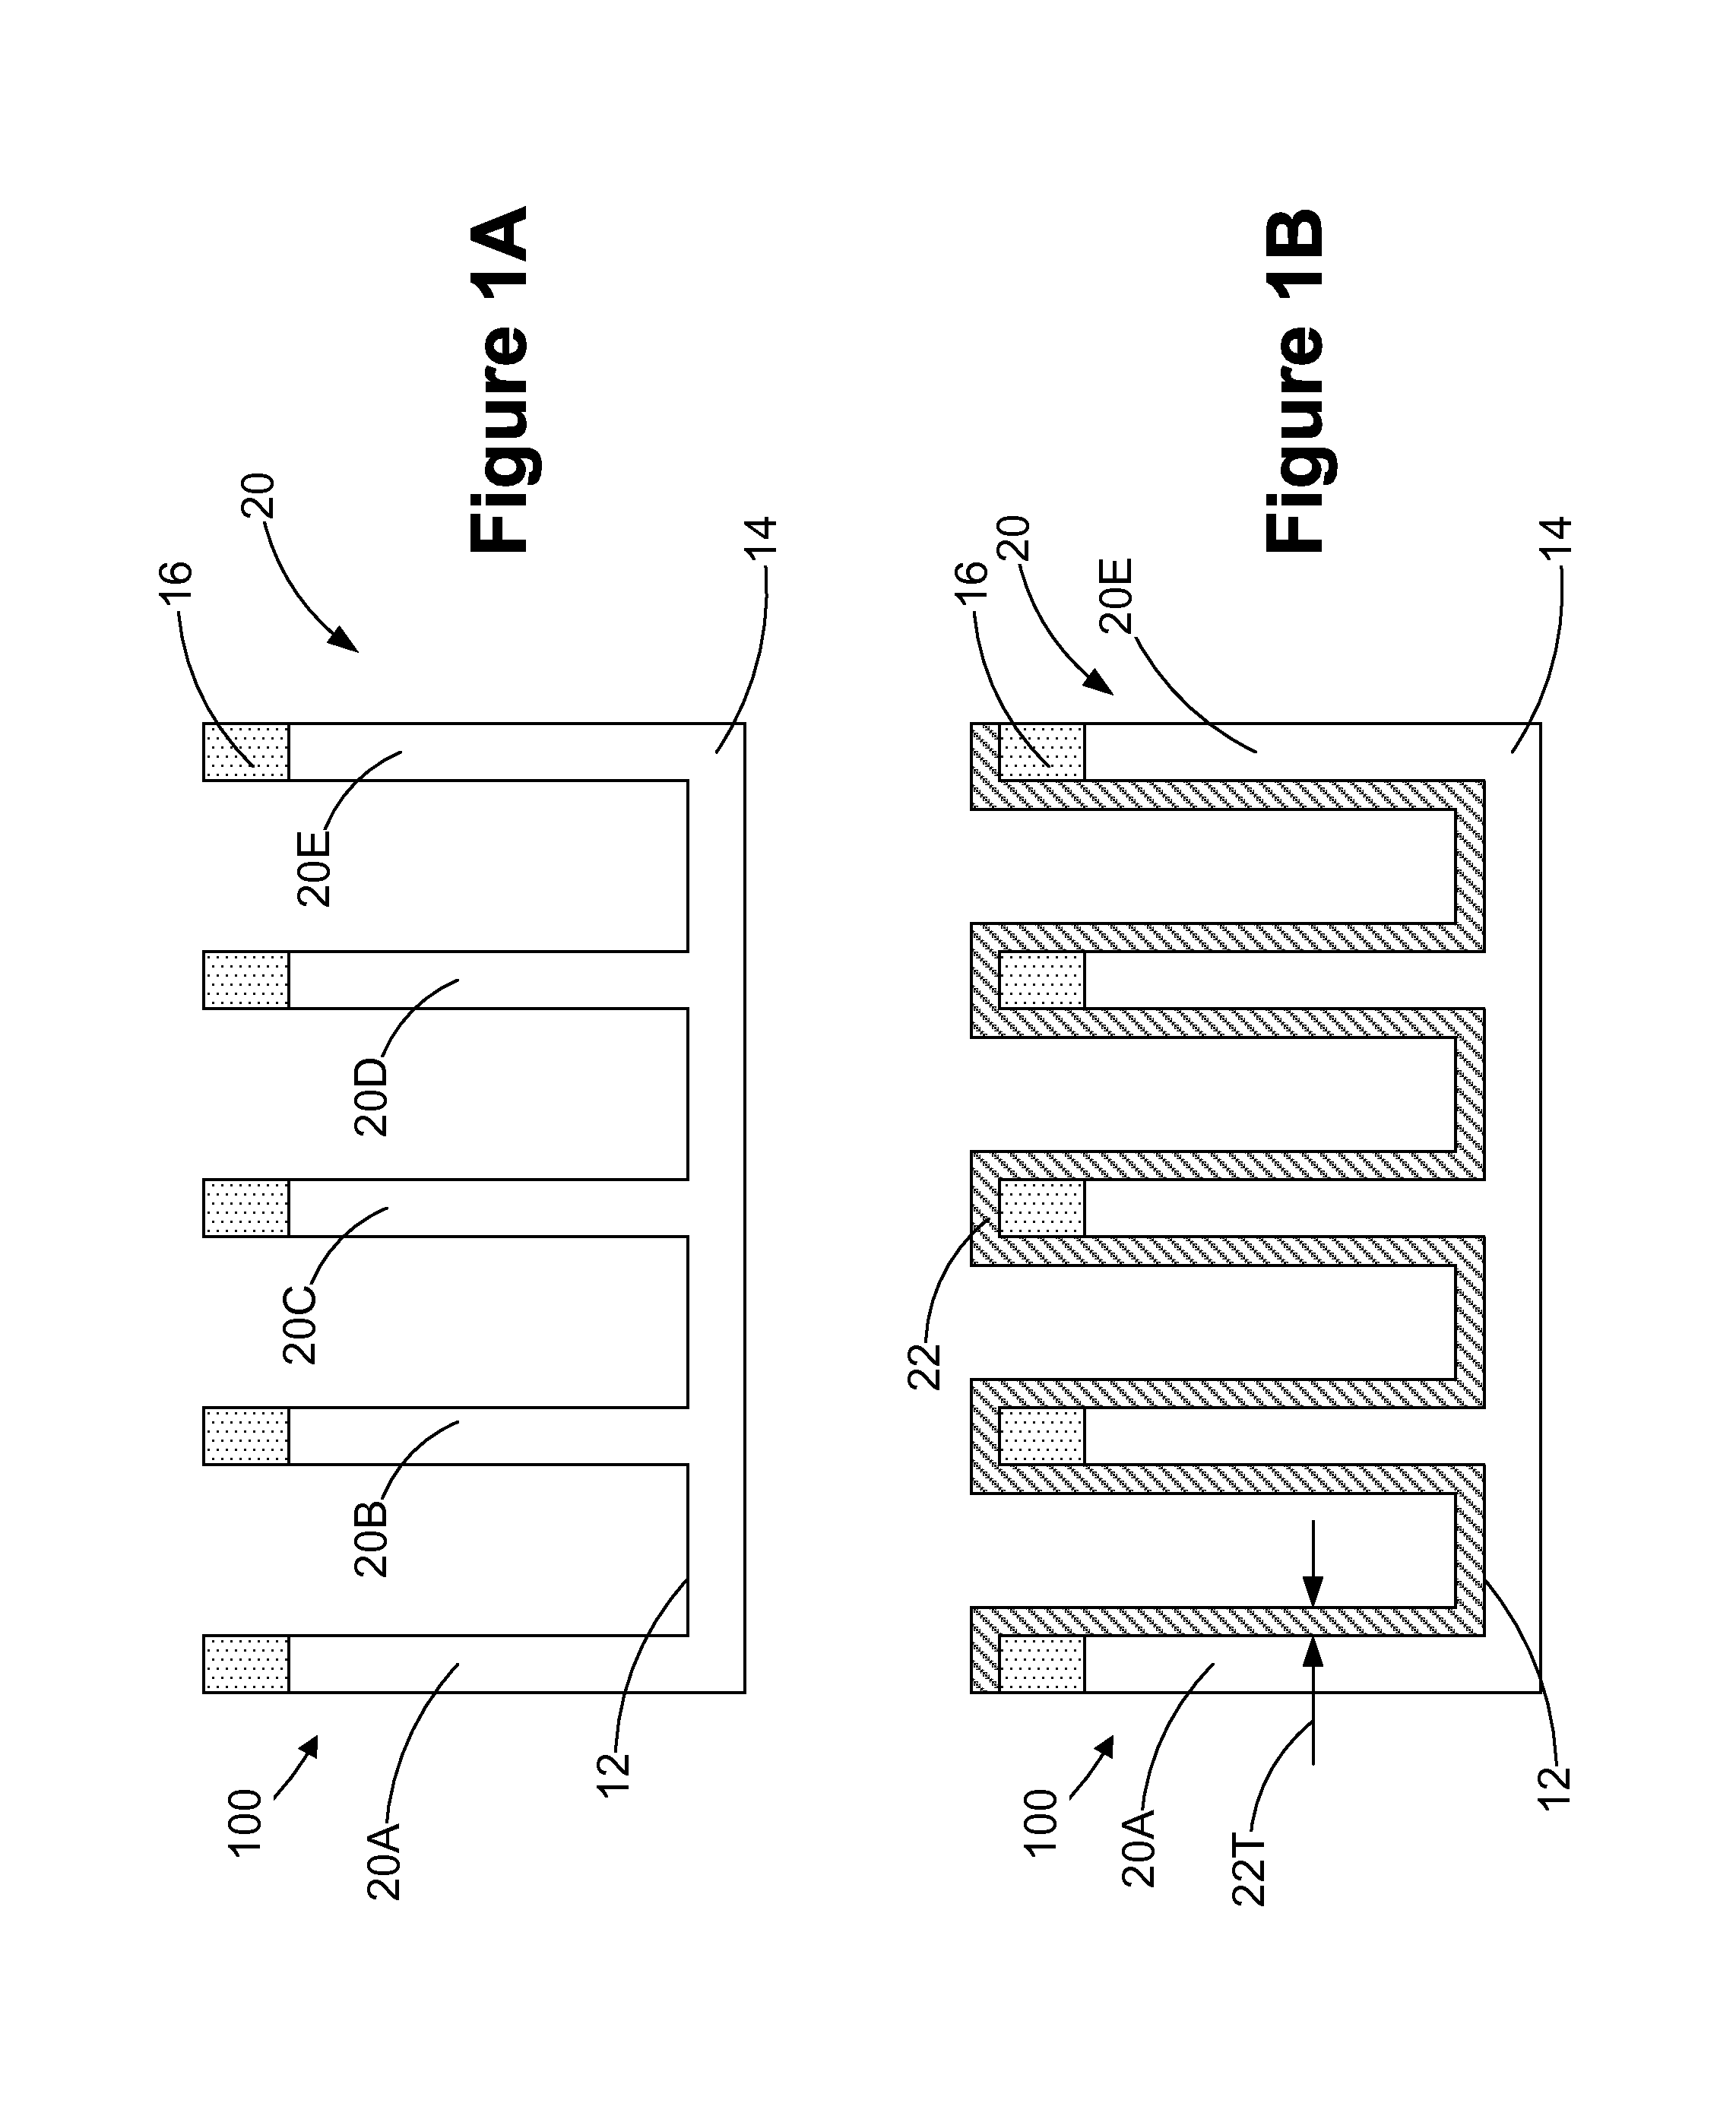 Methods of forming bulk FinFET devices by performing a recessing process on liner materials to define different fin heights and FinFET devices with such recessed liner materials